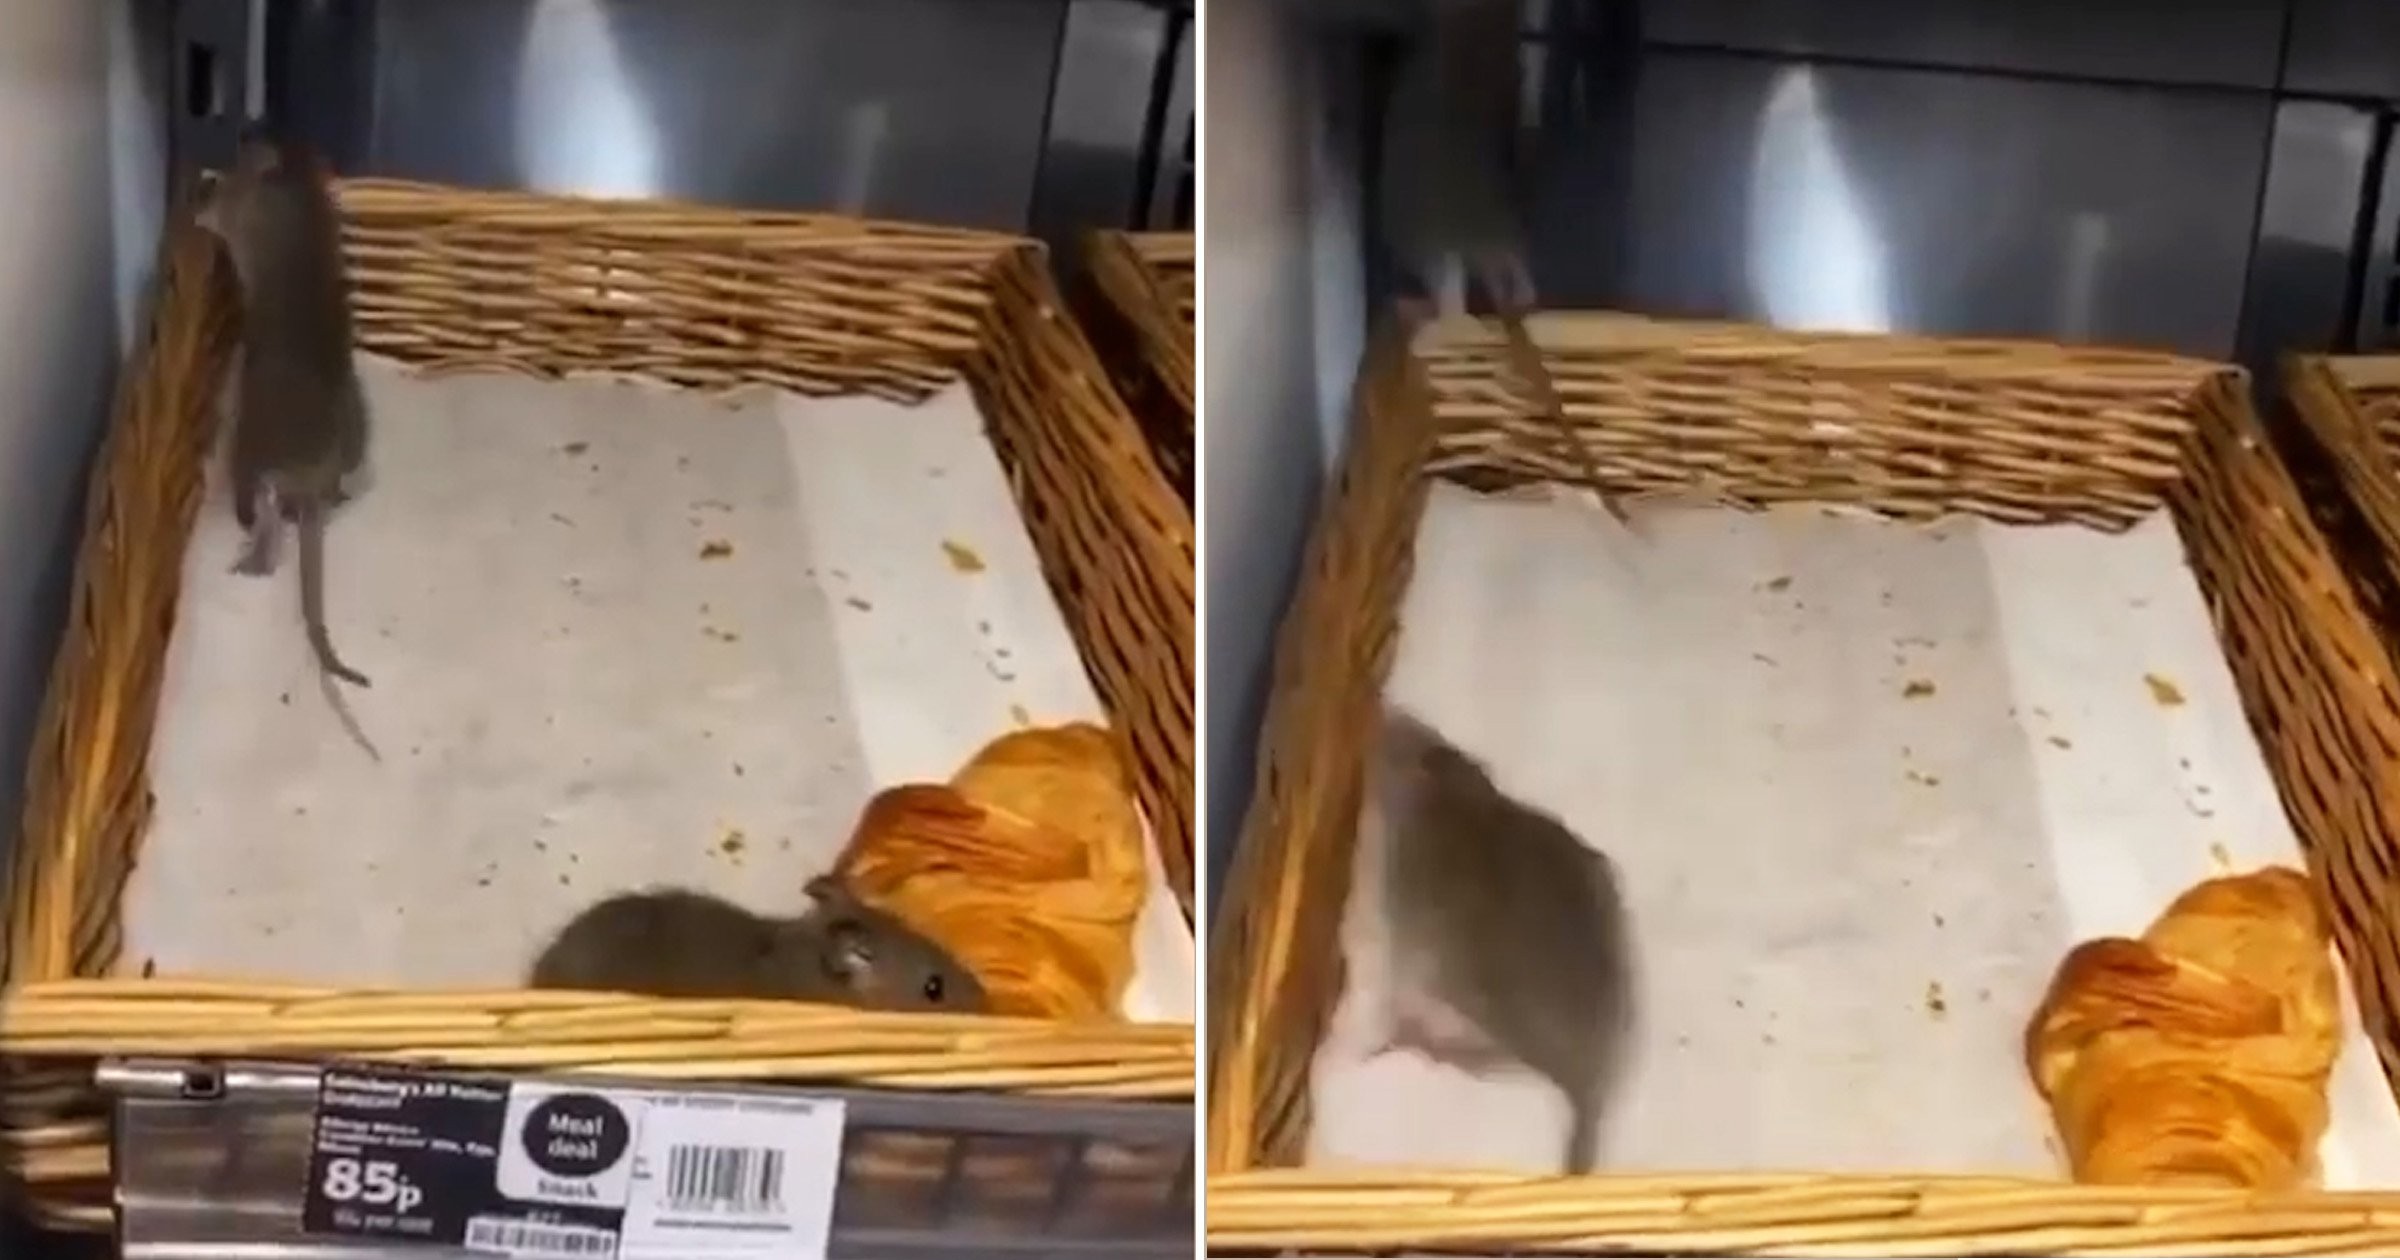 In London Sainsbury’s Store Shoppers are Shocked By The Sight and Filmed The Evidence Of The Rat Crawling Over Pastries